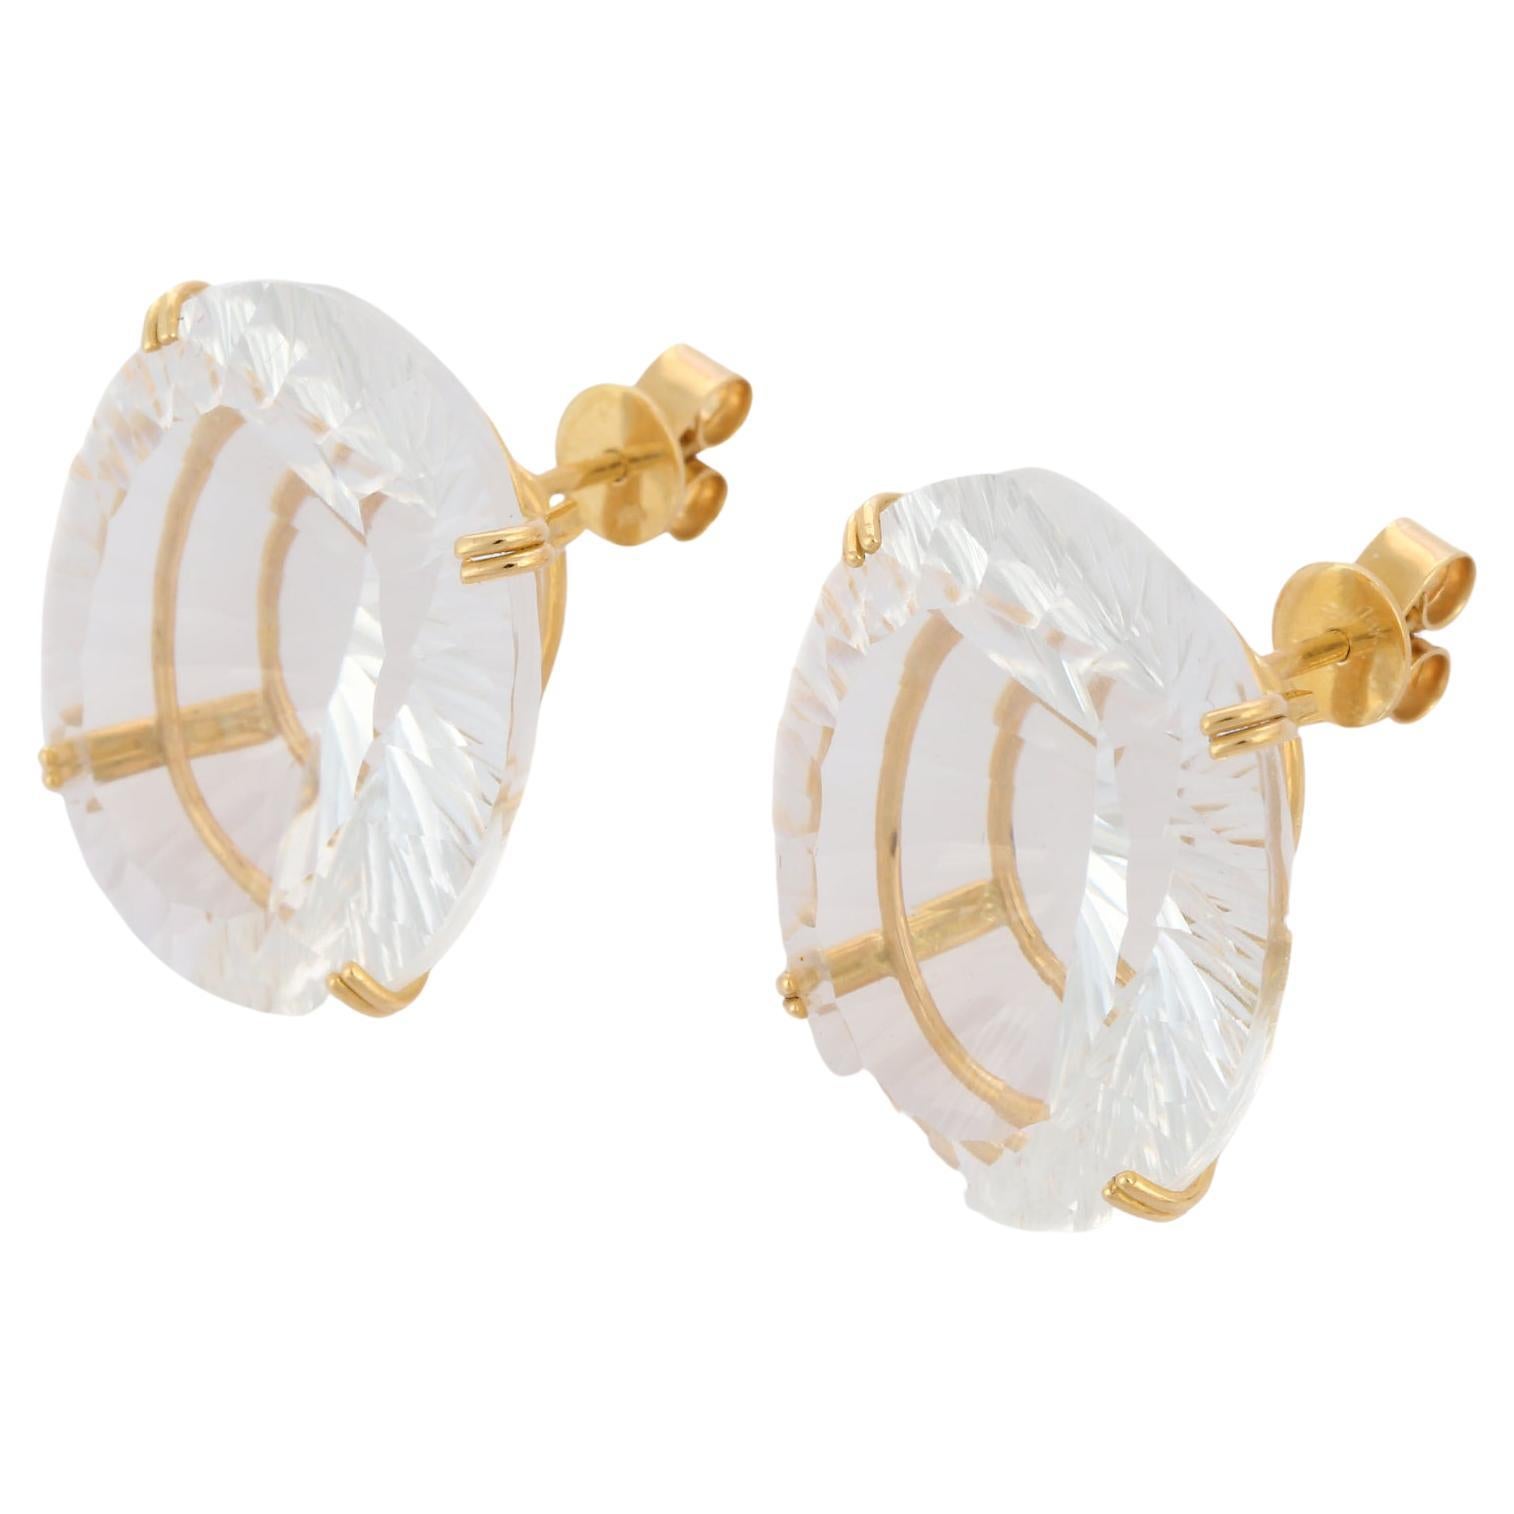 Studs create a subtle beauty while showcasing the colors of the natural precious gemstones making a statement.
Oval cut crystal studs in 18K gold. Embrace your look with these stunning pair of earrings suitable for any occasion to complete your